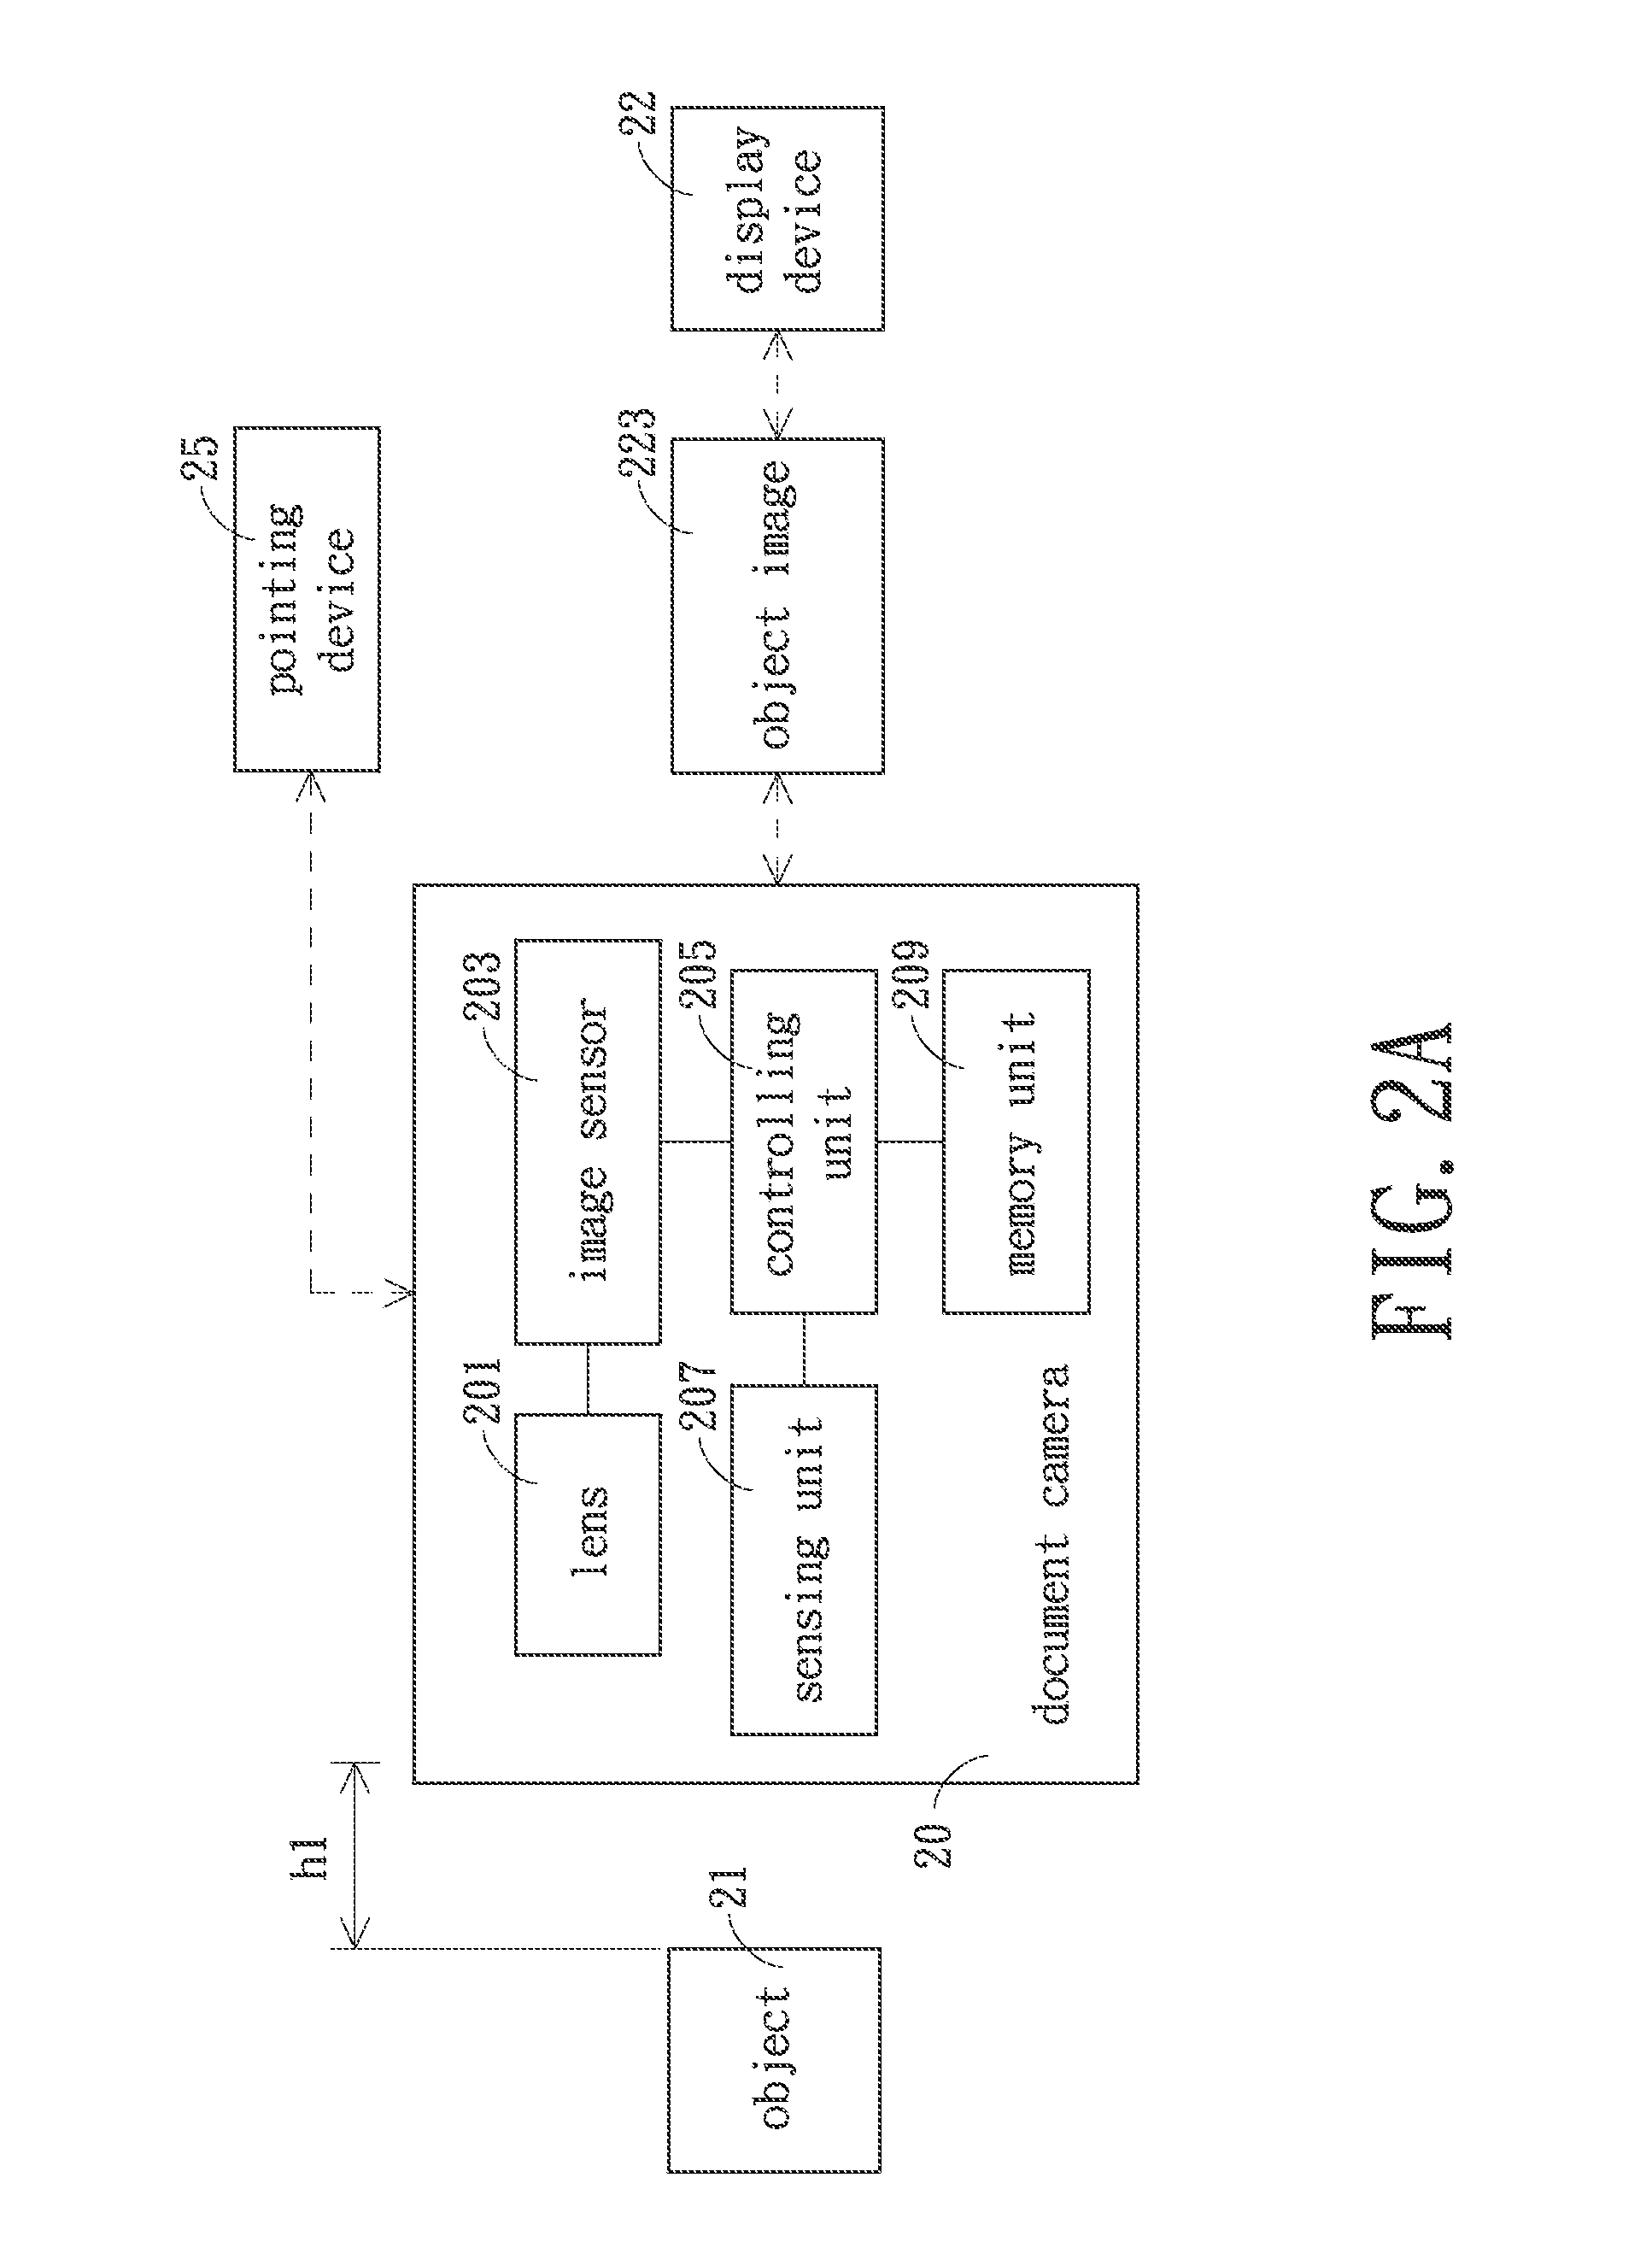 Document camera with size-estimating function and size estimation method